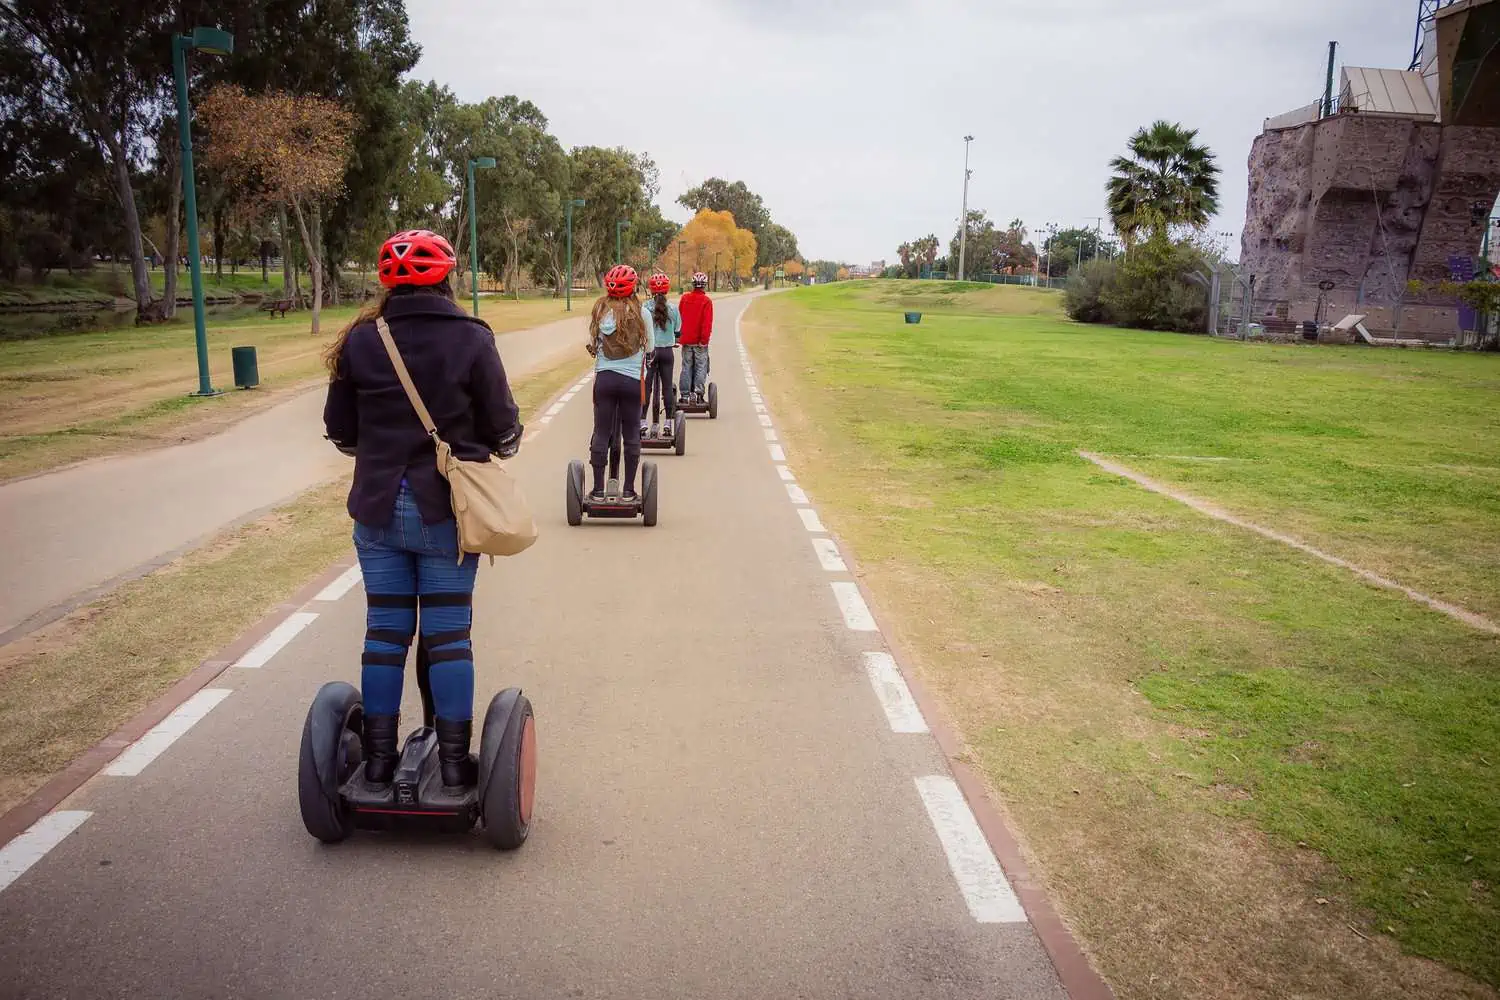 People with helmet on traveling on Segway in the park